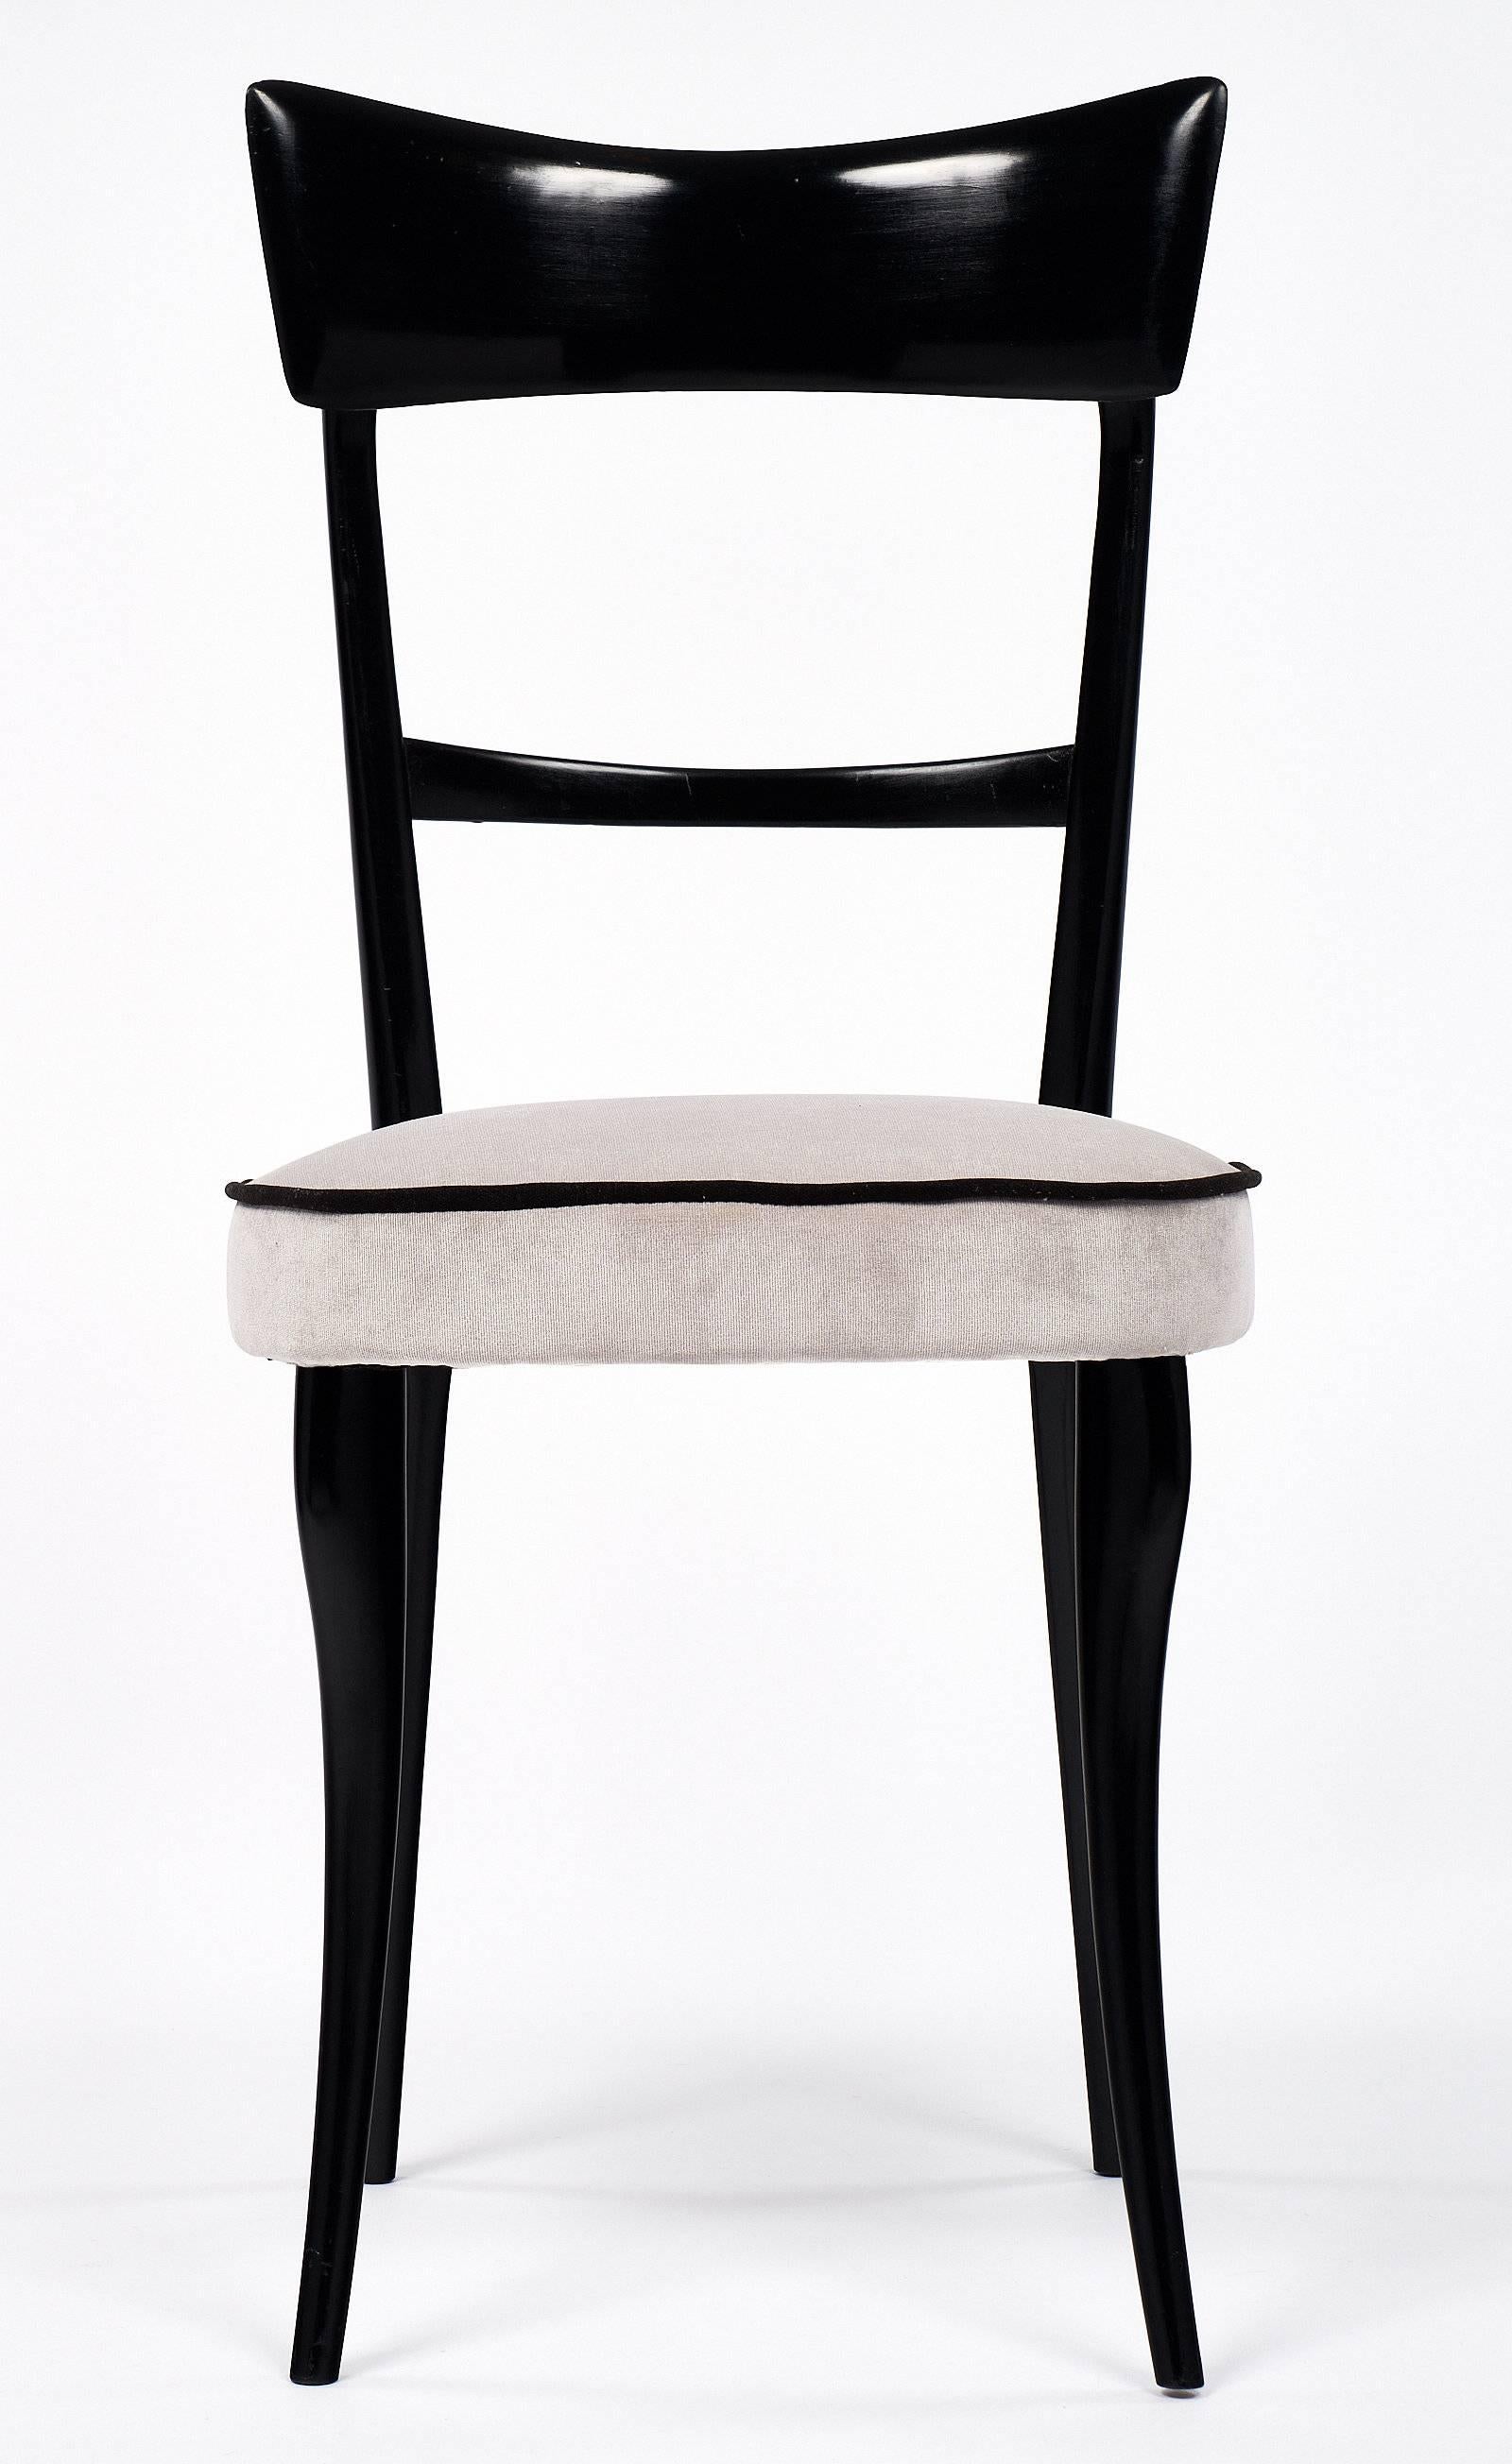 Six elegant Italian dining chairs in the style of Paolo Buffa. These ebonized chairs have been finished with a lustrous French polish and reupholstered with a grey velvet blend. We love the sophisticated legs and black piping. This set has both